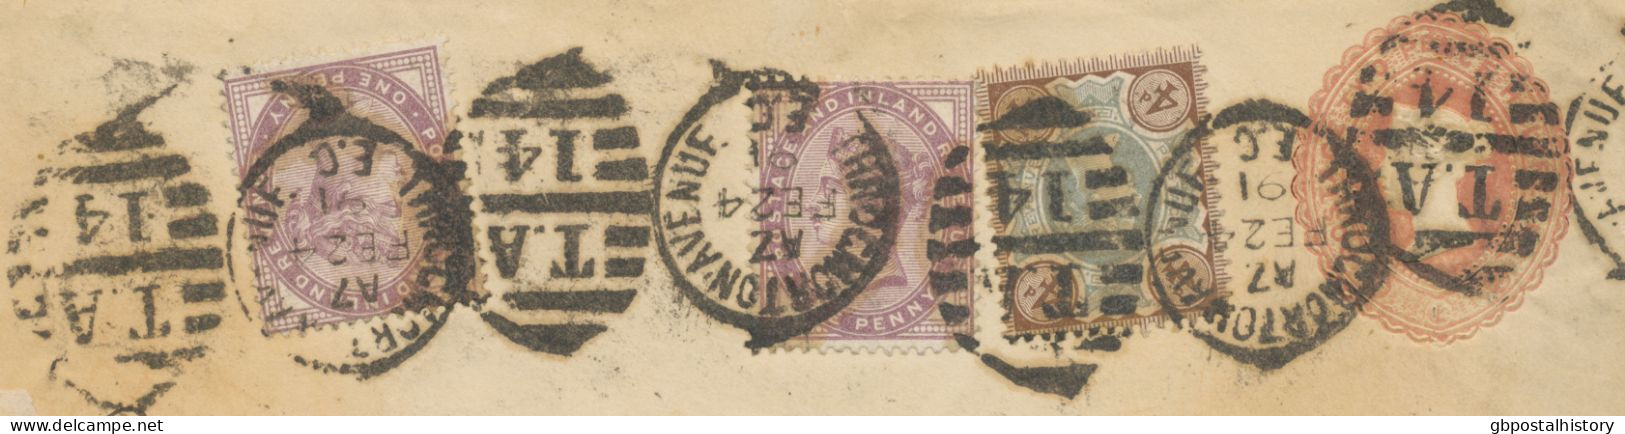 GB 1891 QV 2½d Lake (dated 18 12 90) Fine Stamped To Order Postal Stationery Env (Lavy & Co., London) Uprated With QV 4d - Covers & Documents